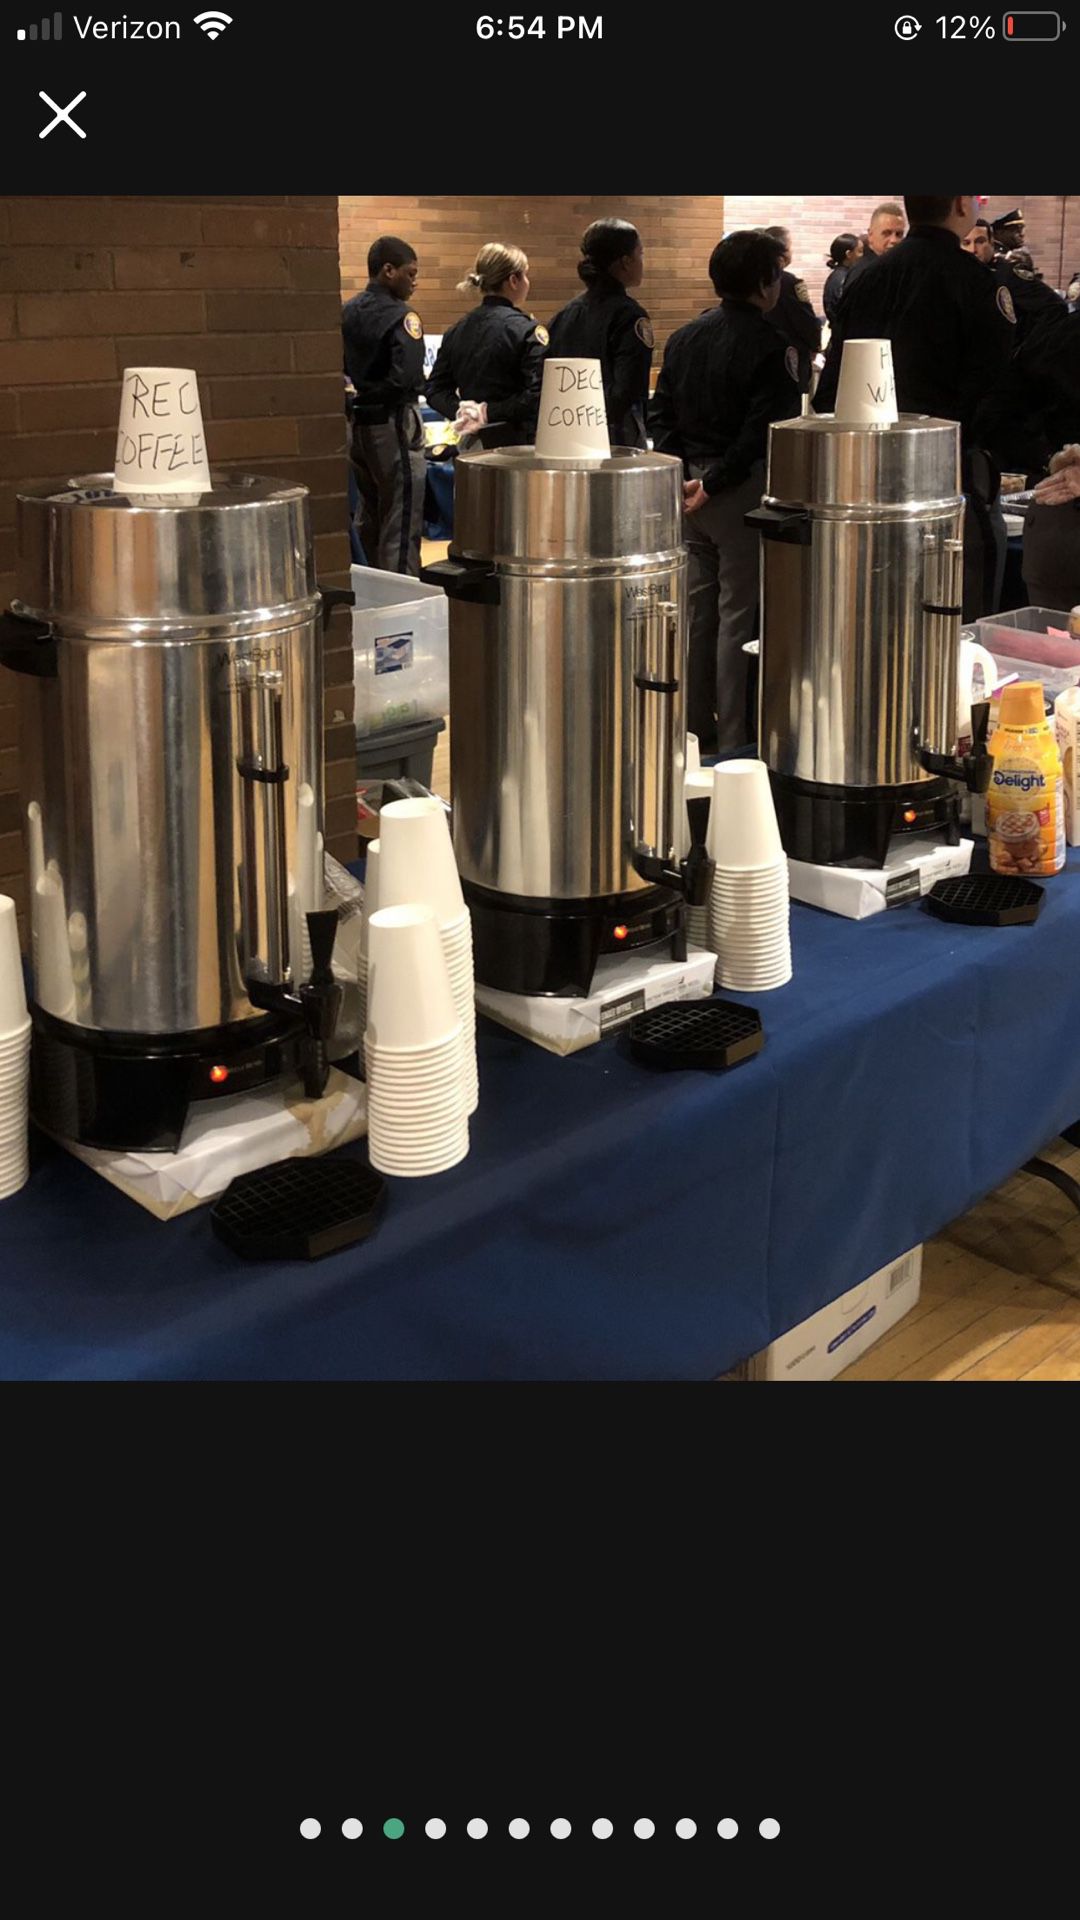 West Bend 100 Cup Coffee Pot, Percolator Or Heats Up Water Or Cider. for  Sale in Smithtown, NY - OfferUp